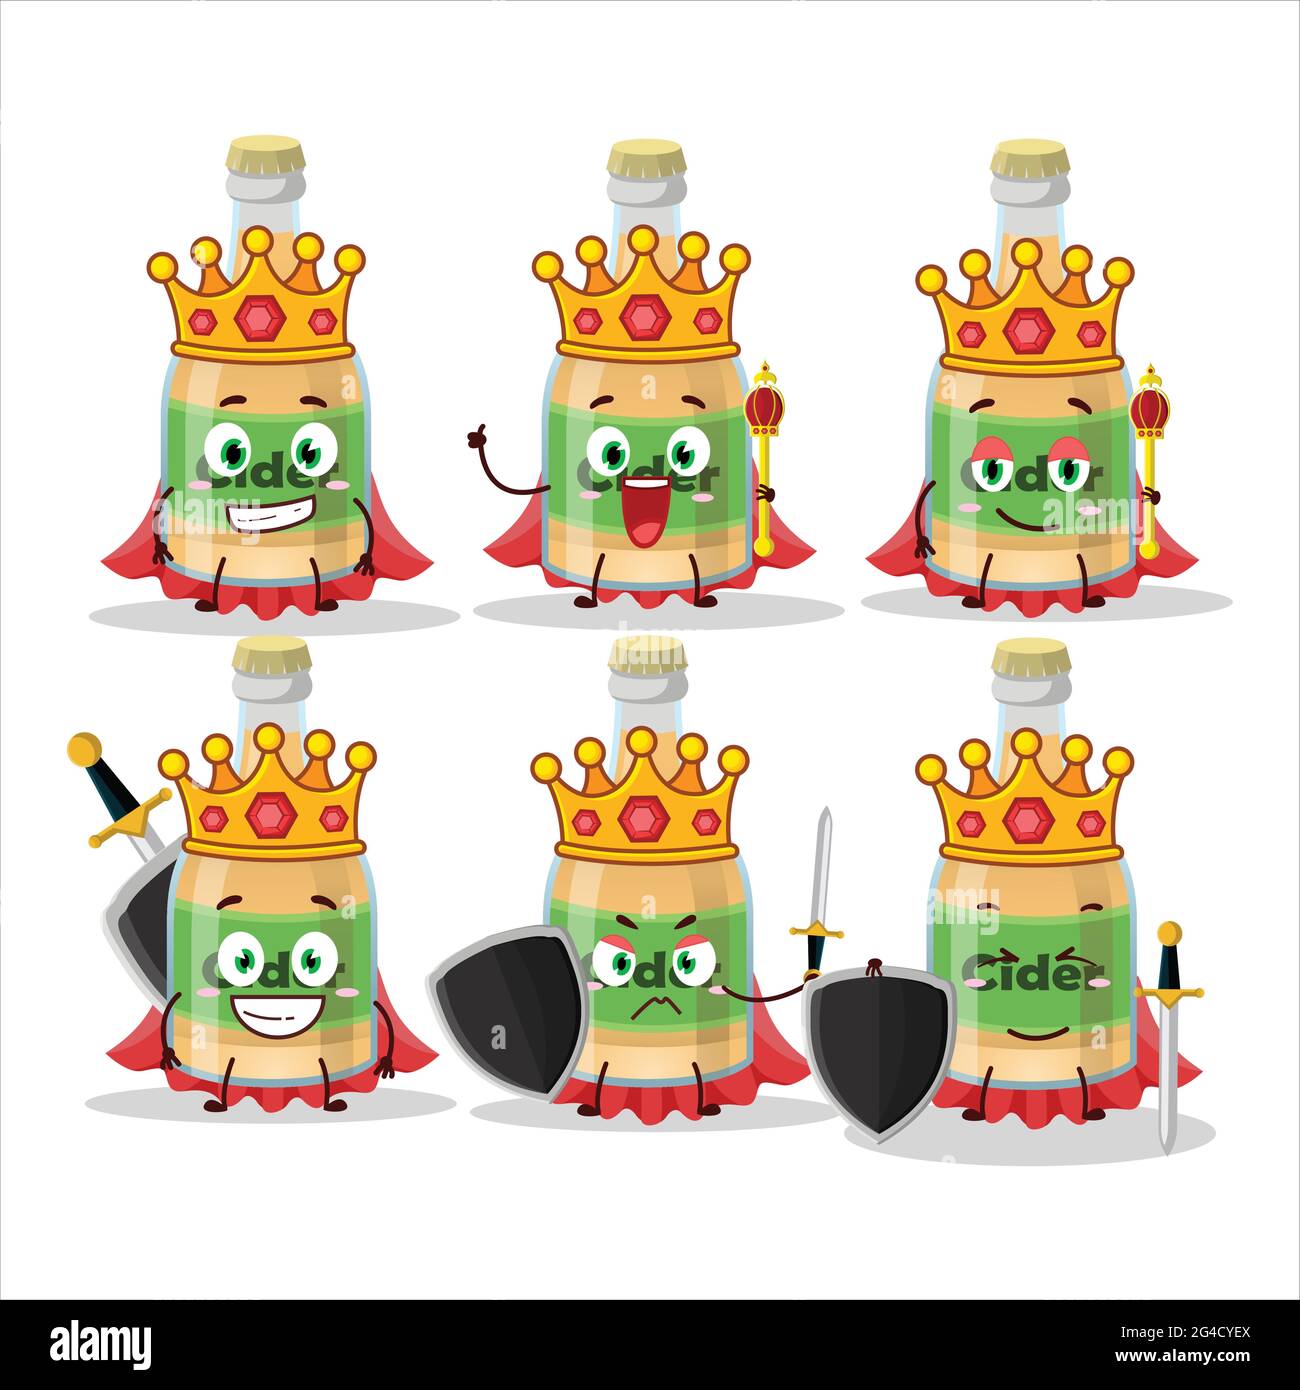 A Charismatic King Cider Bottle Cartoon Character Wearing A Gold Crown Vector Illustration